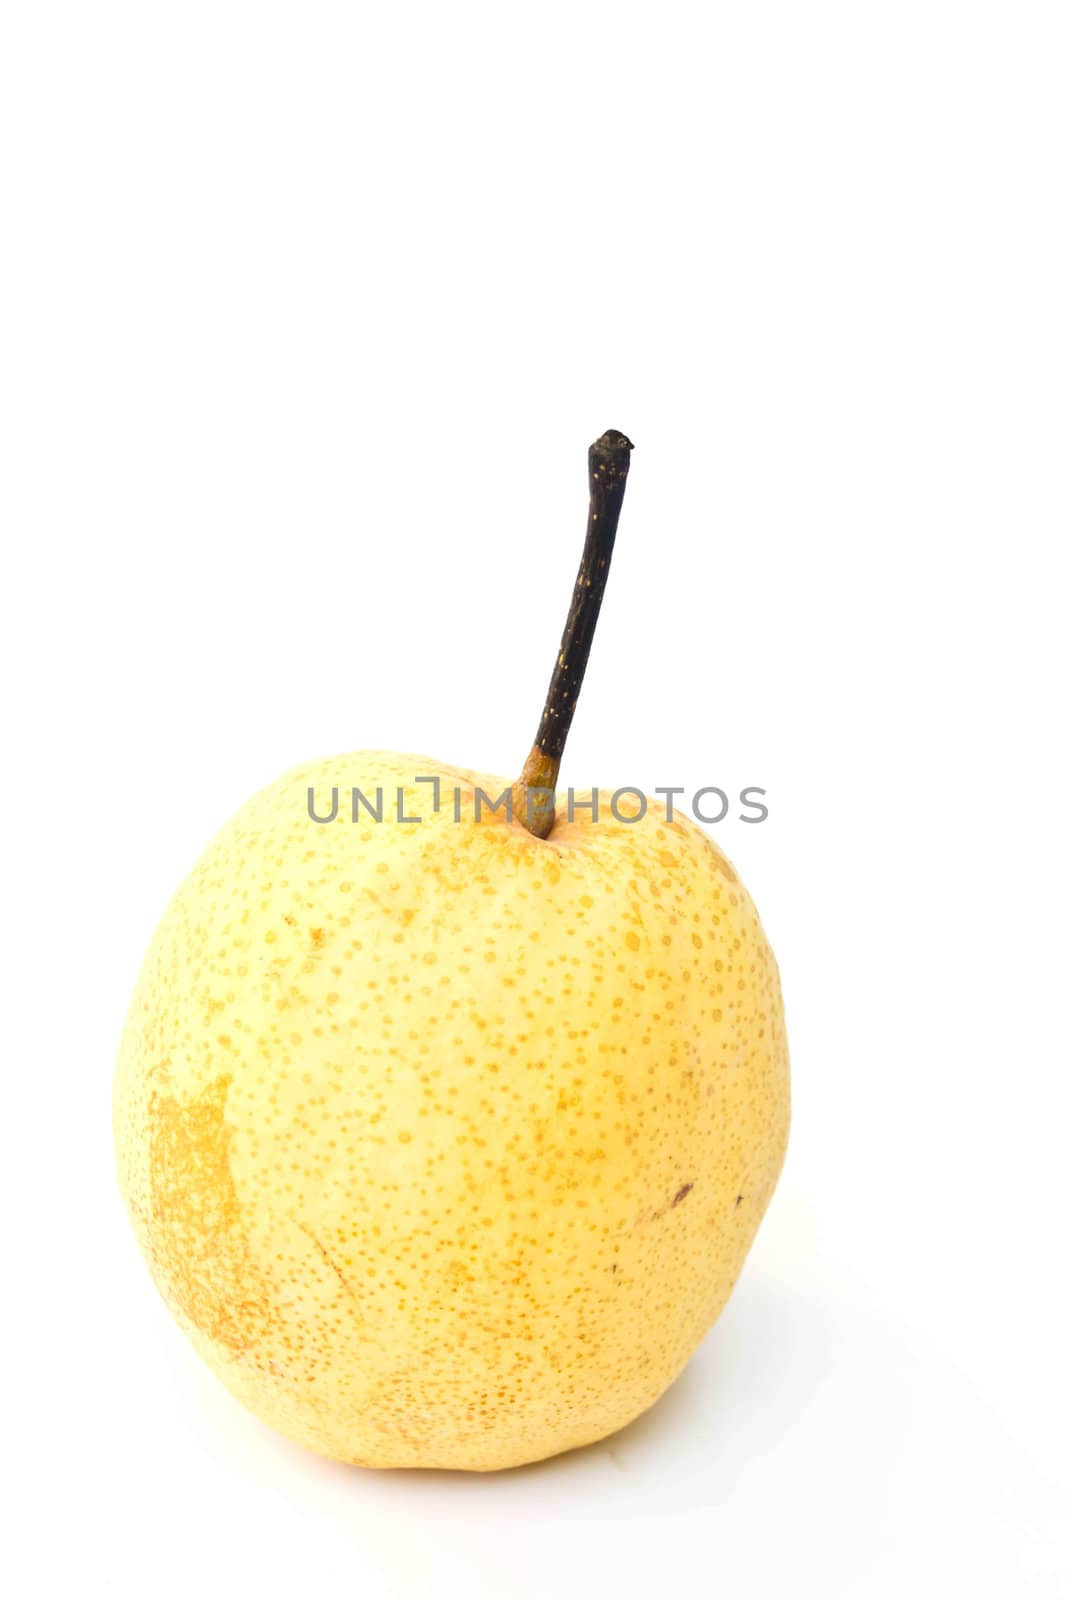 pear on a white background